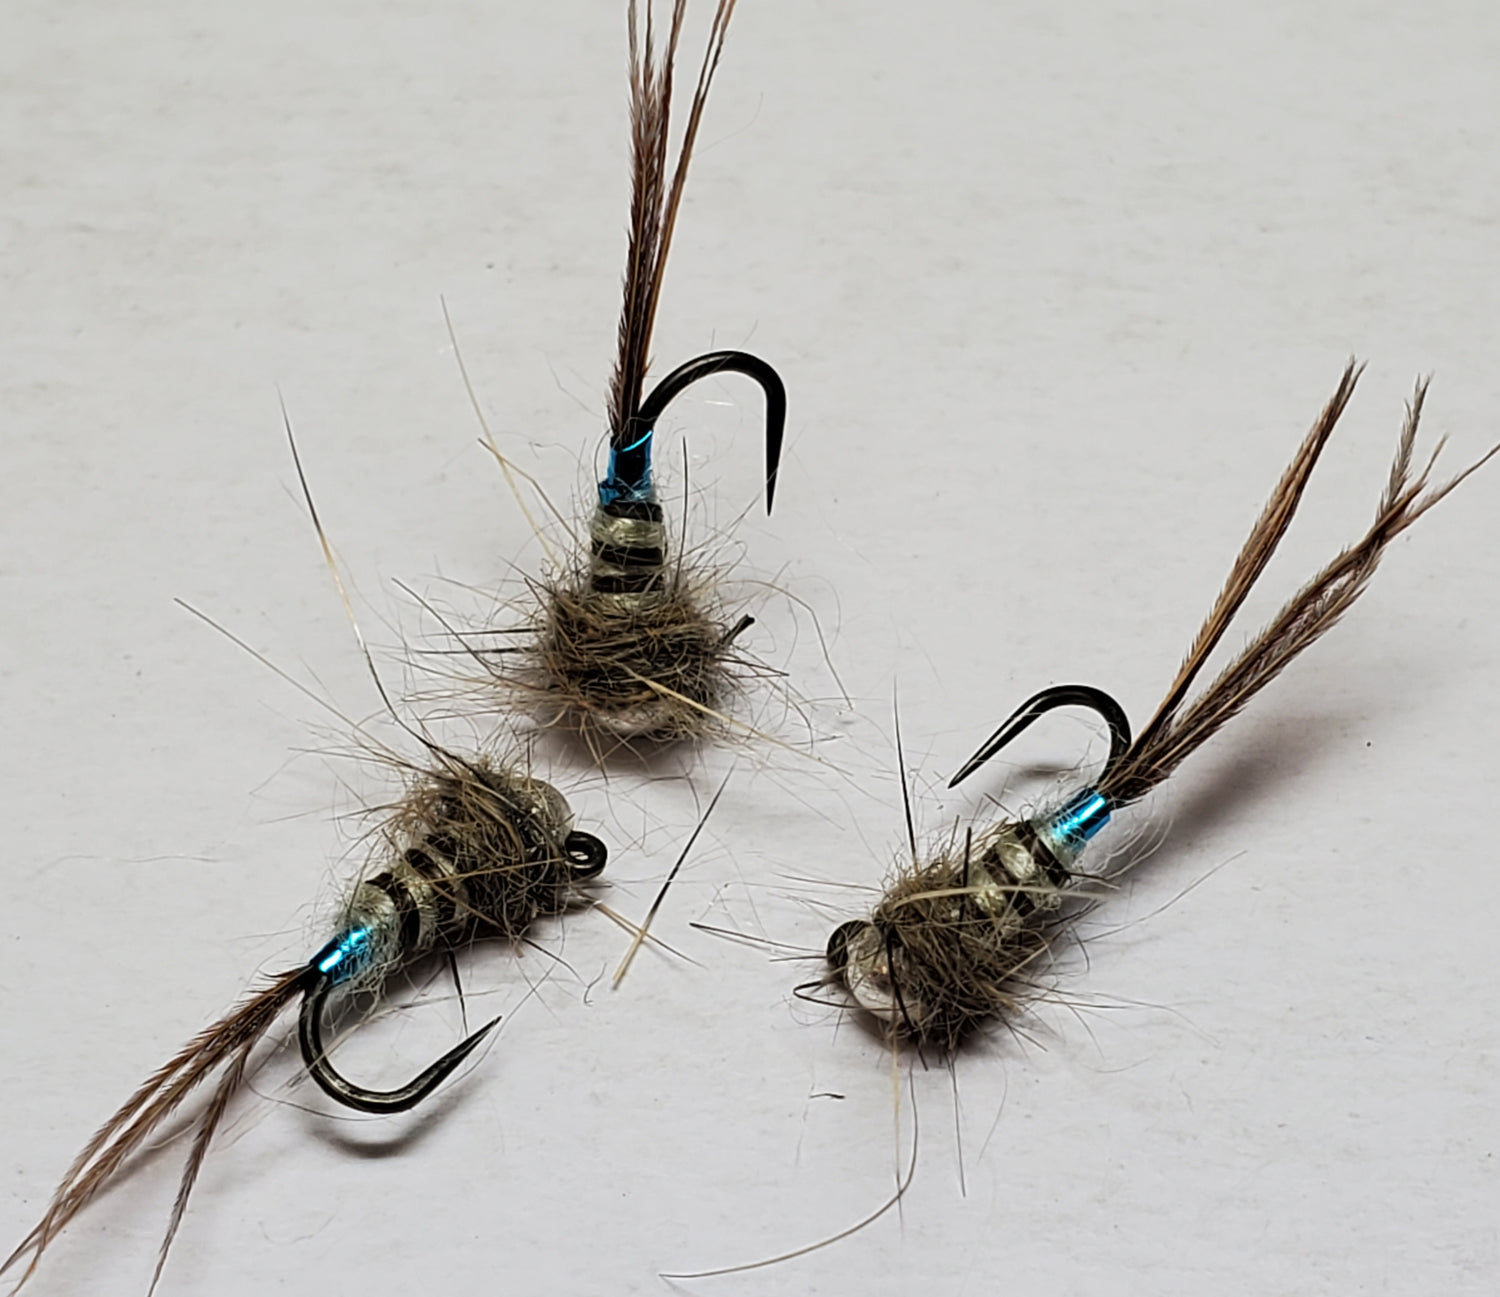 Trout Jig, Tungsten Bead Head Trout Jig, Trout Jig Nymph, Bead Head Ny –  Baxter House River Outfitters